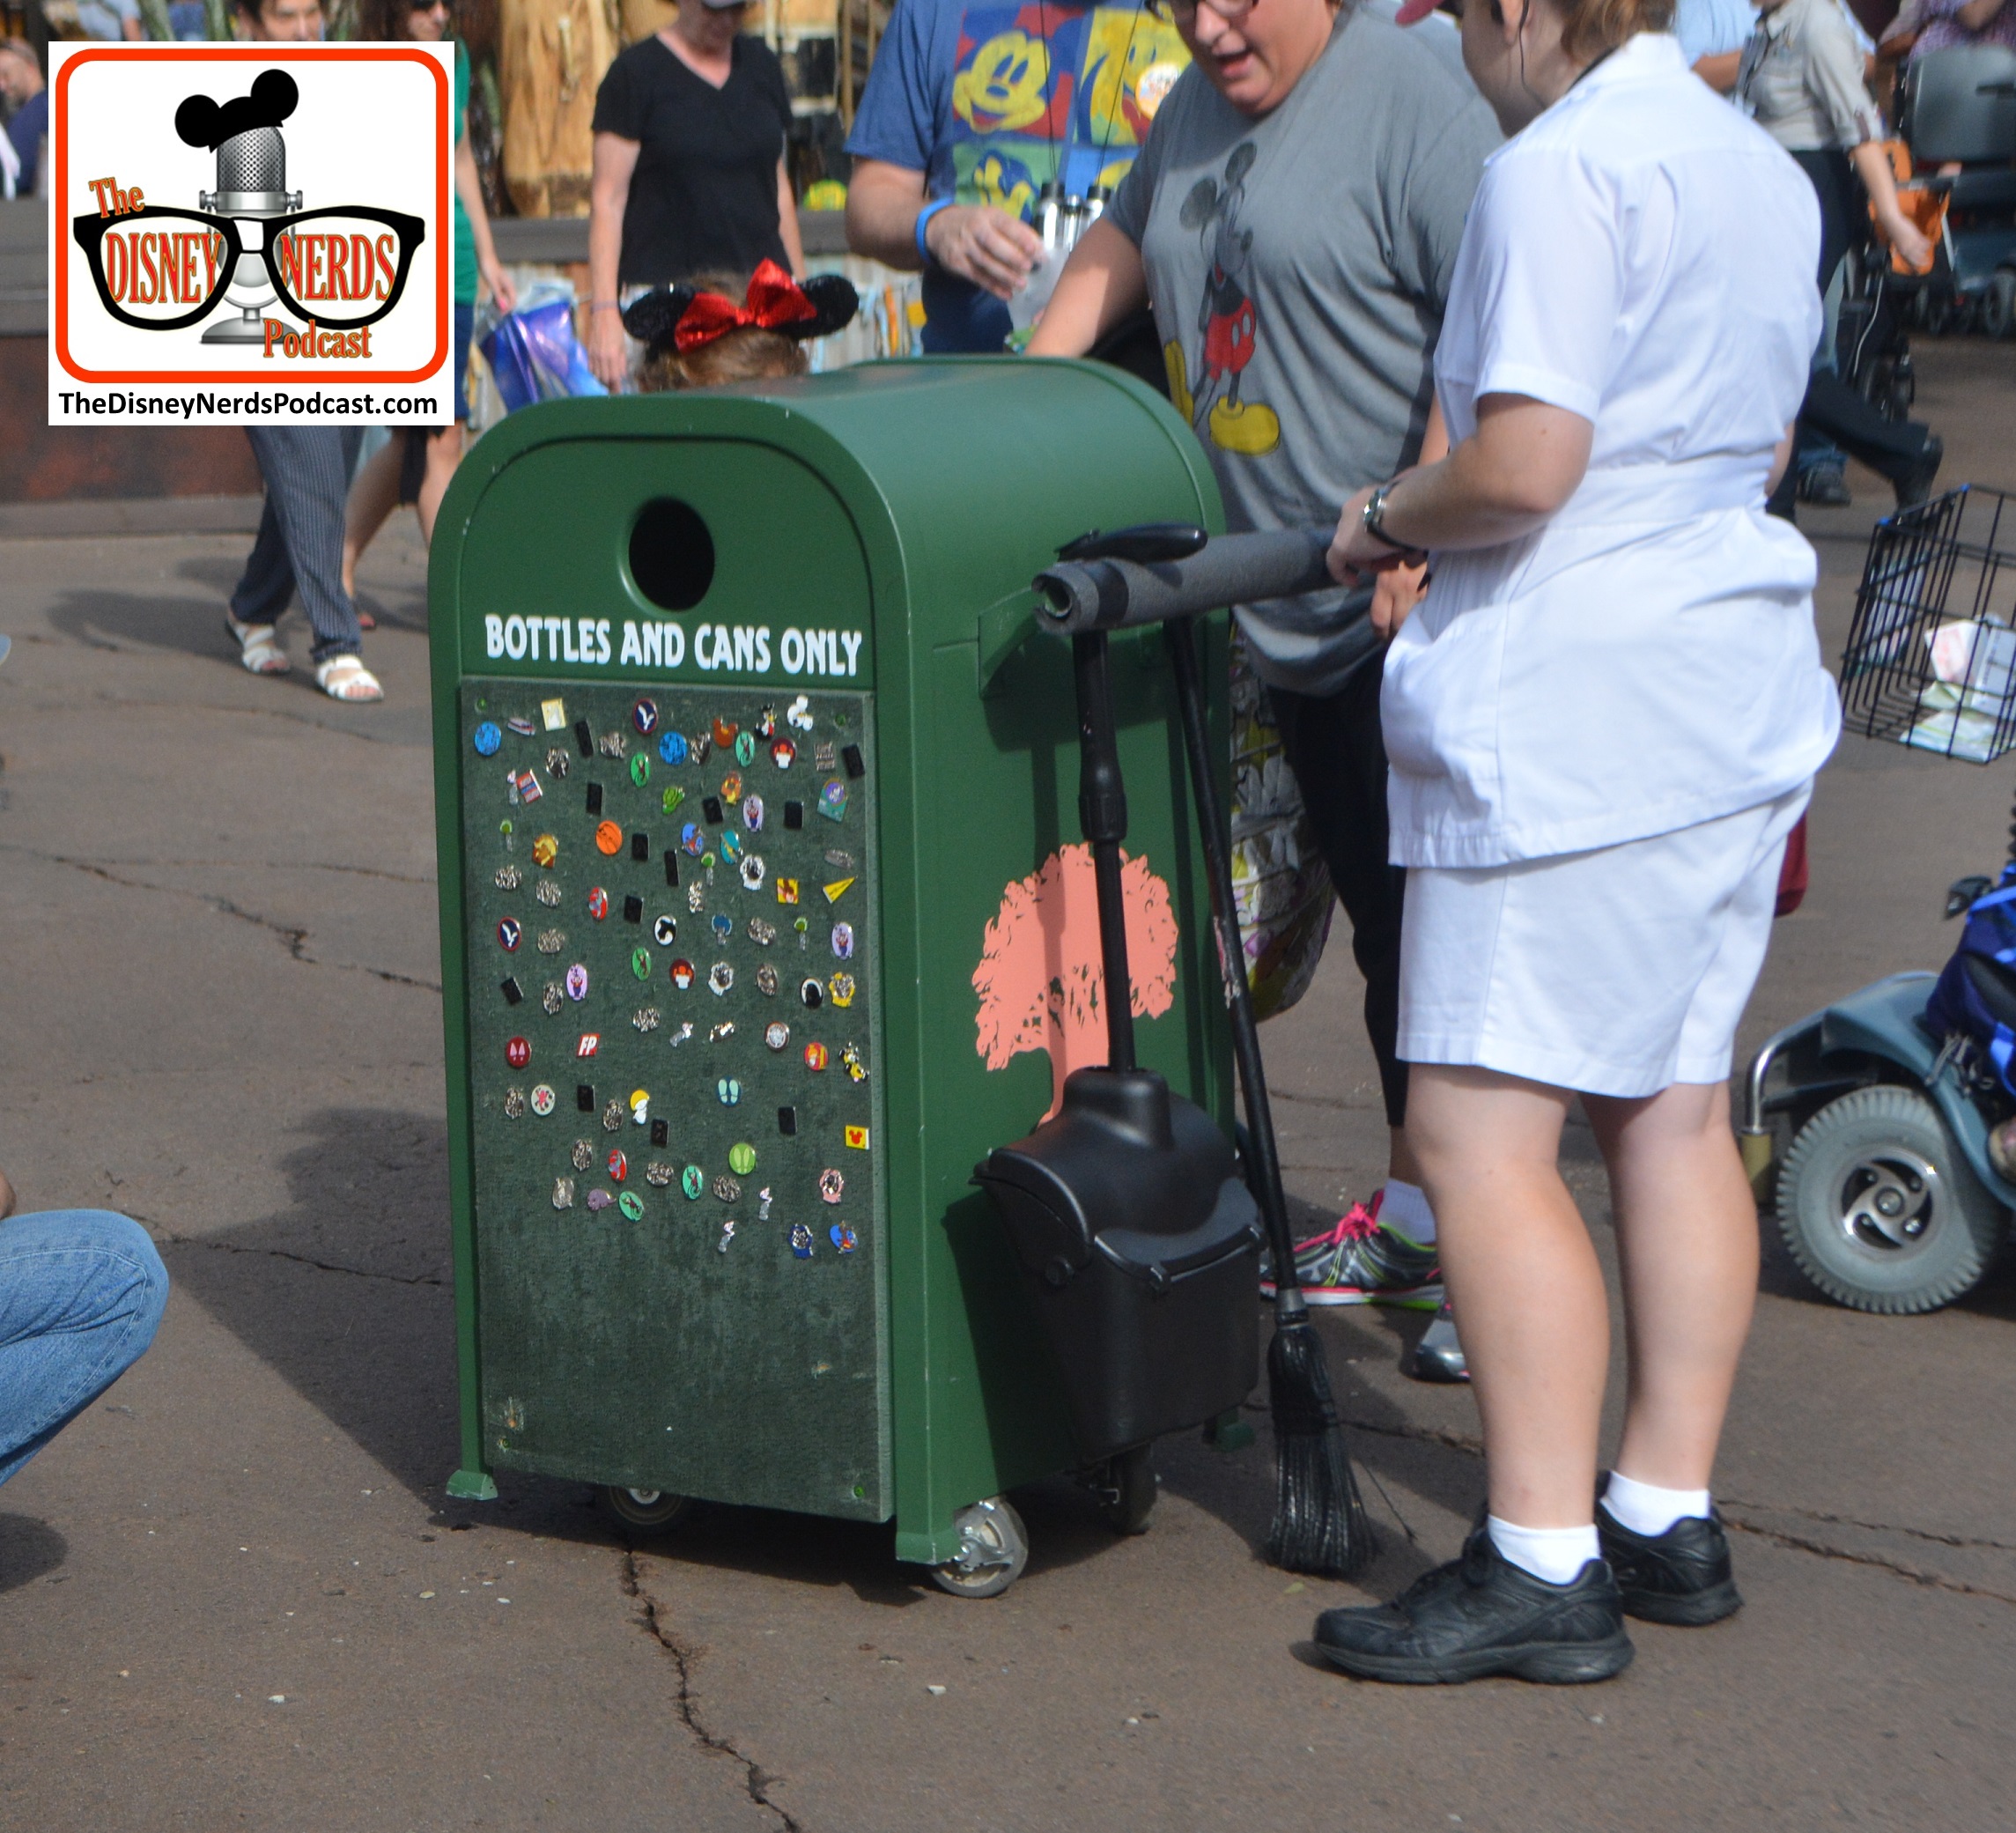 2015-12 - Animal Kingdom - Garbage Can Pin Trading Stations have been popping up all over Walt Disney World - This one near the Tree of Life